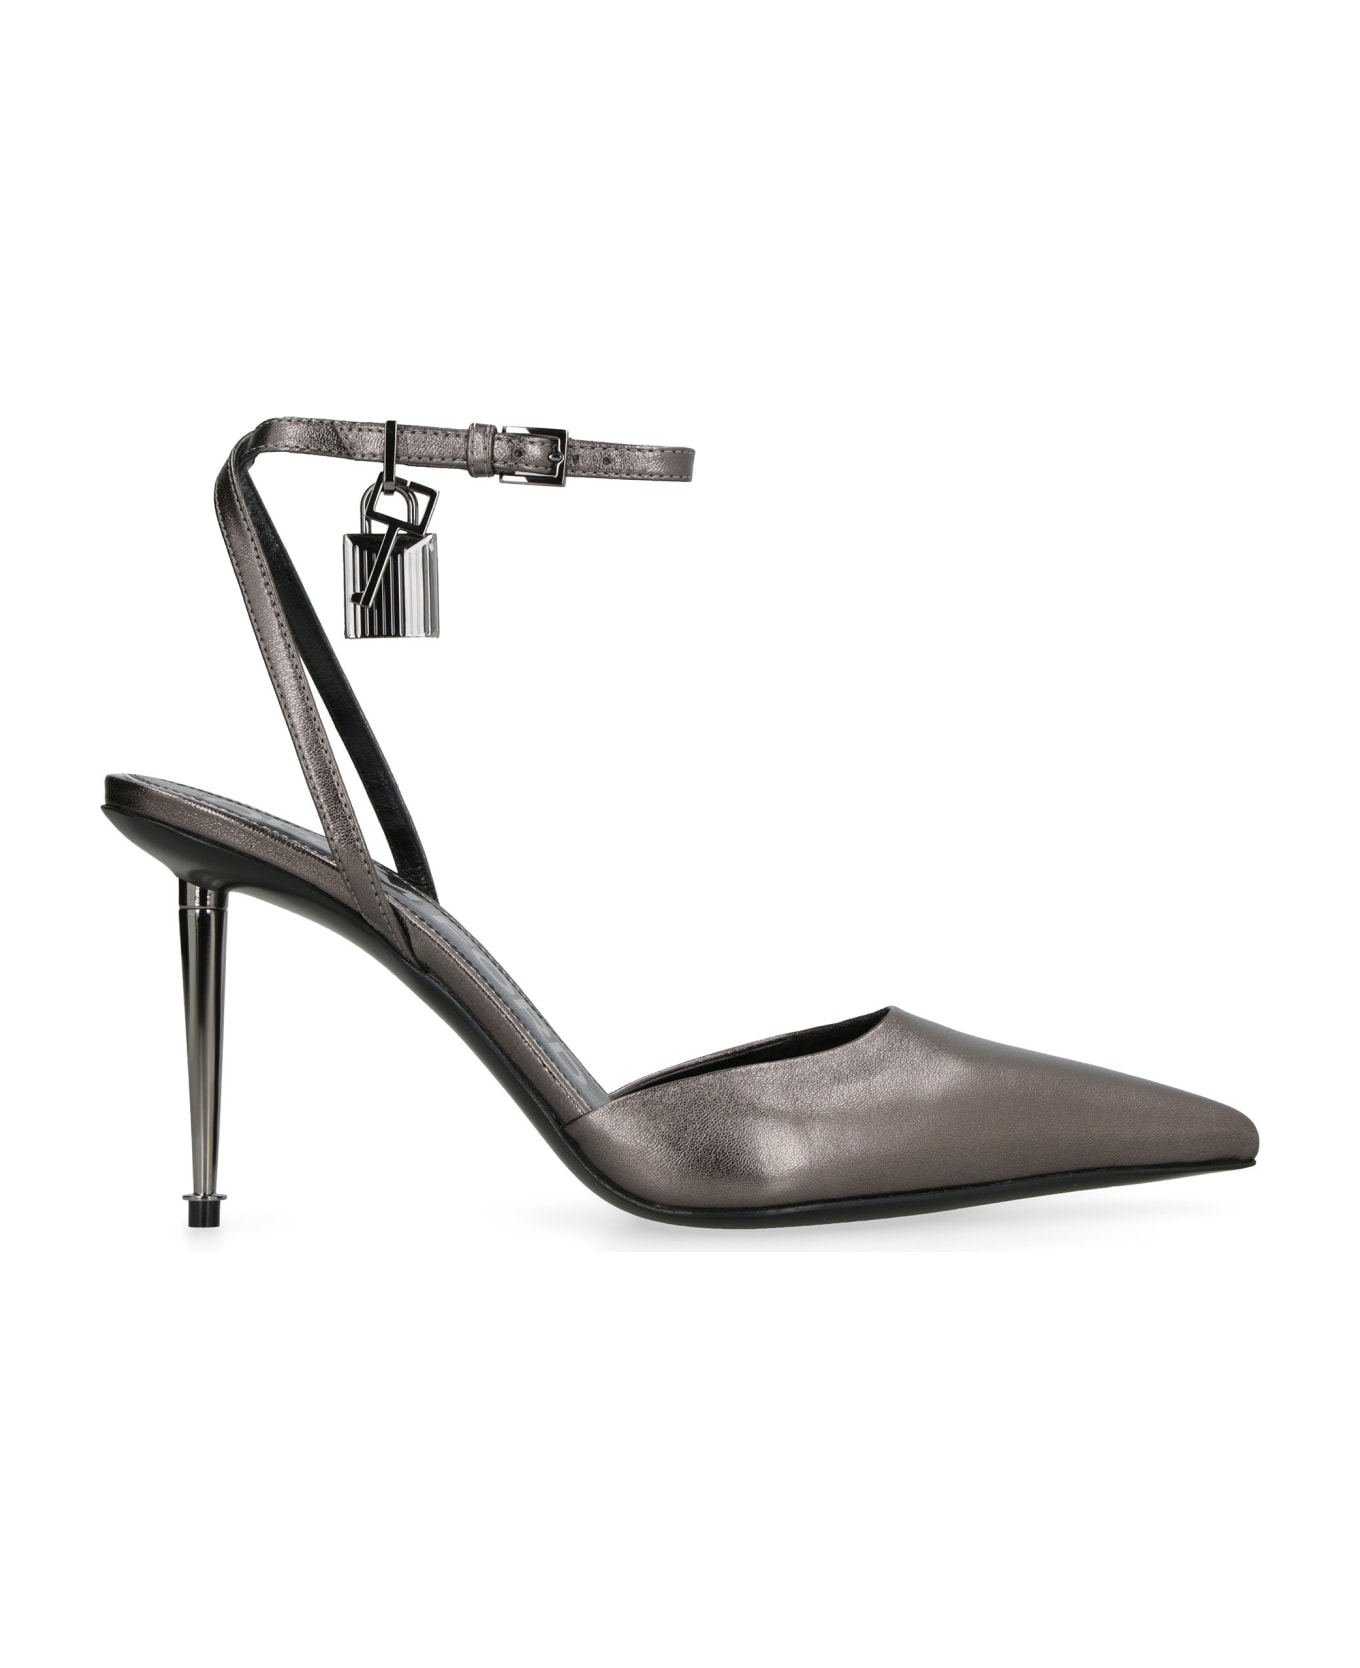 Tom Ford Padlock Leather Slingback Pumps - Silver ハイヒール